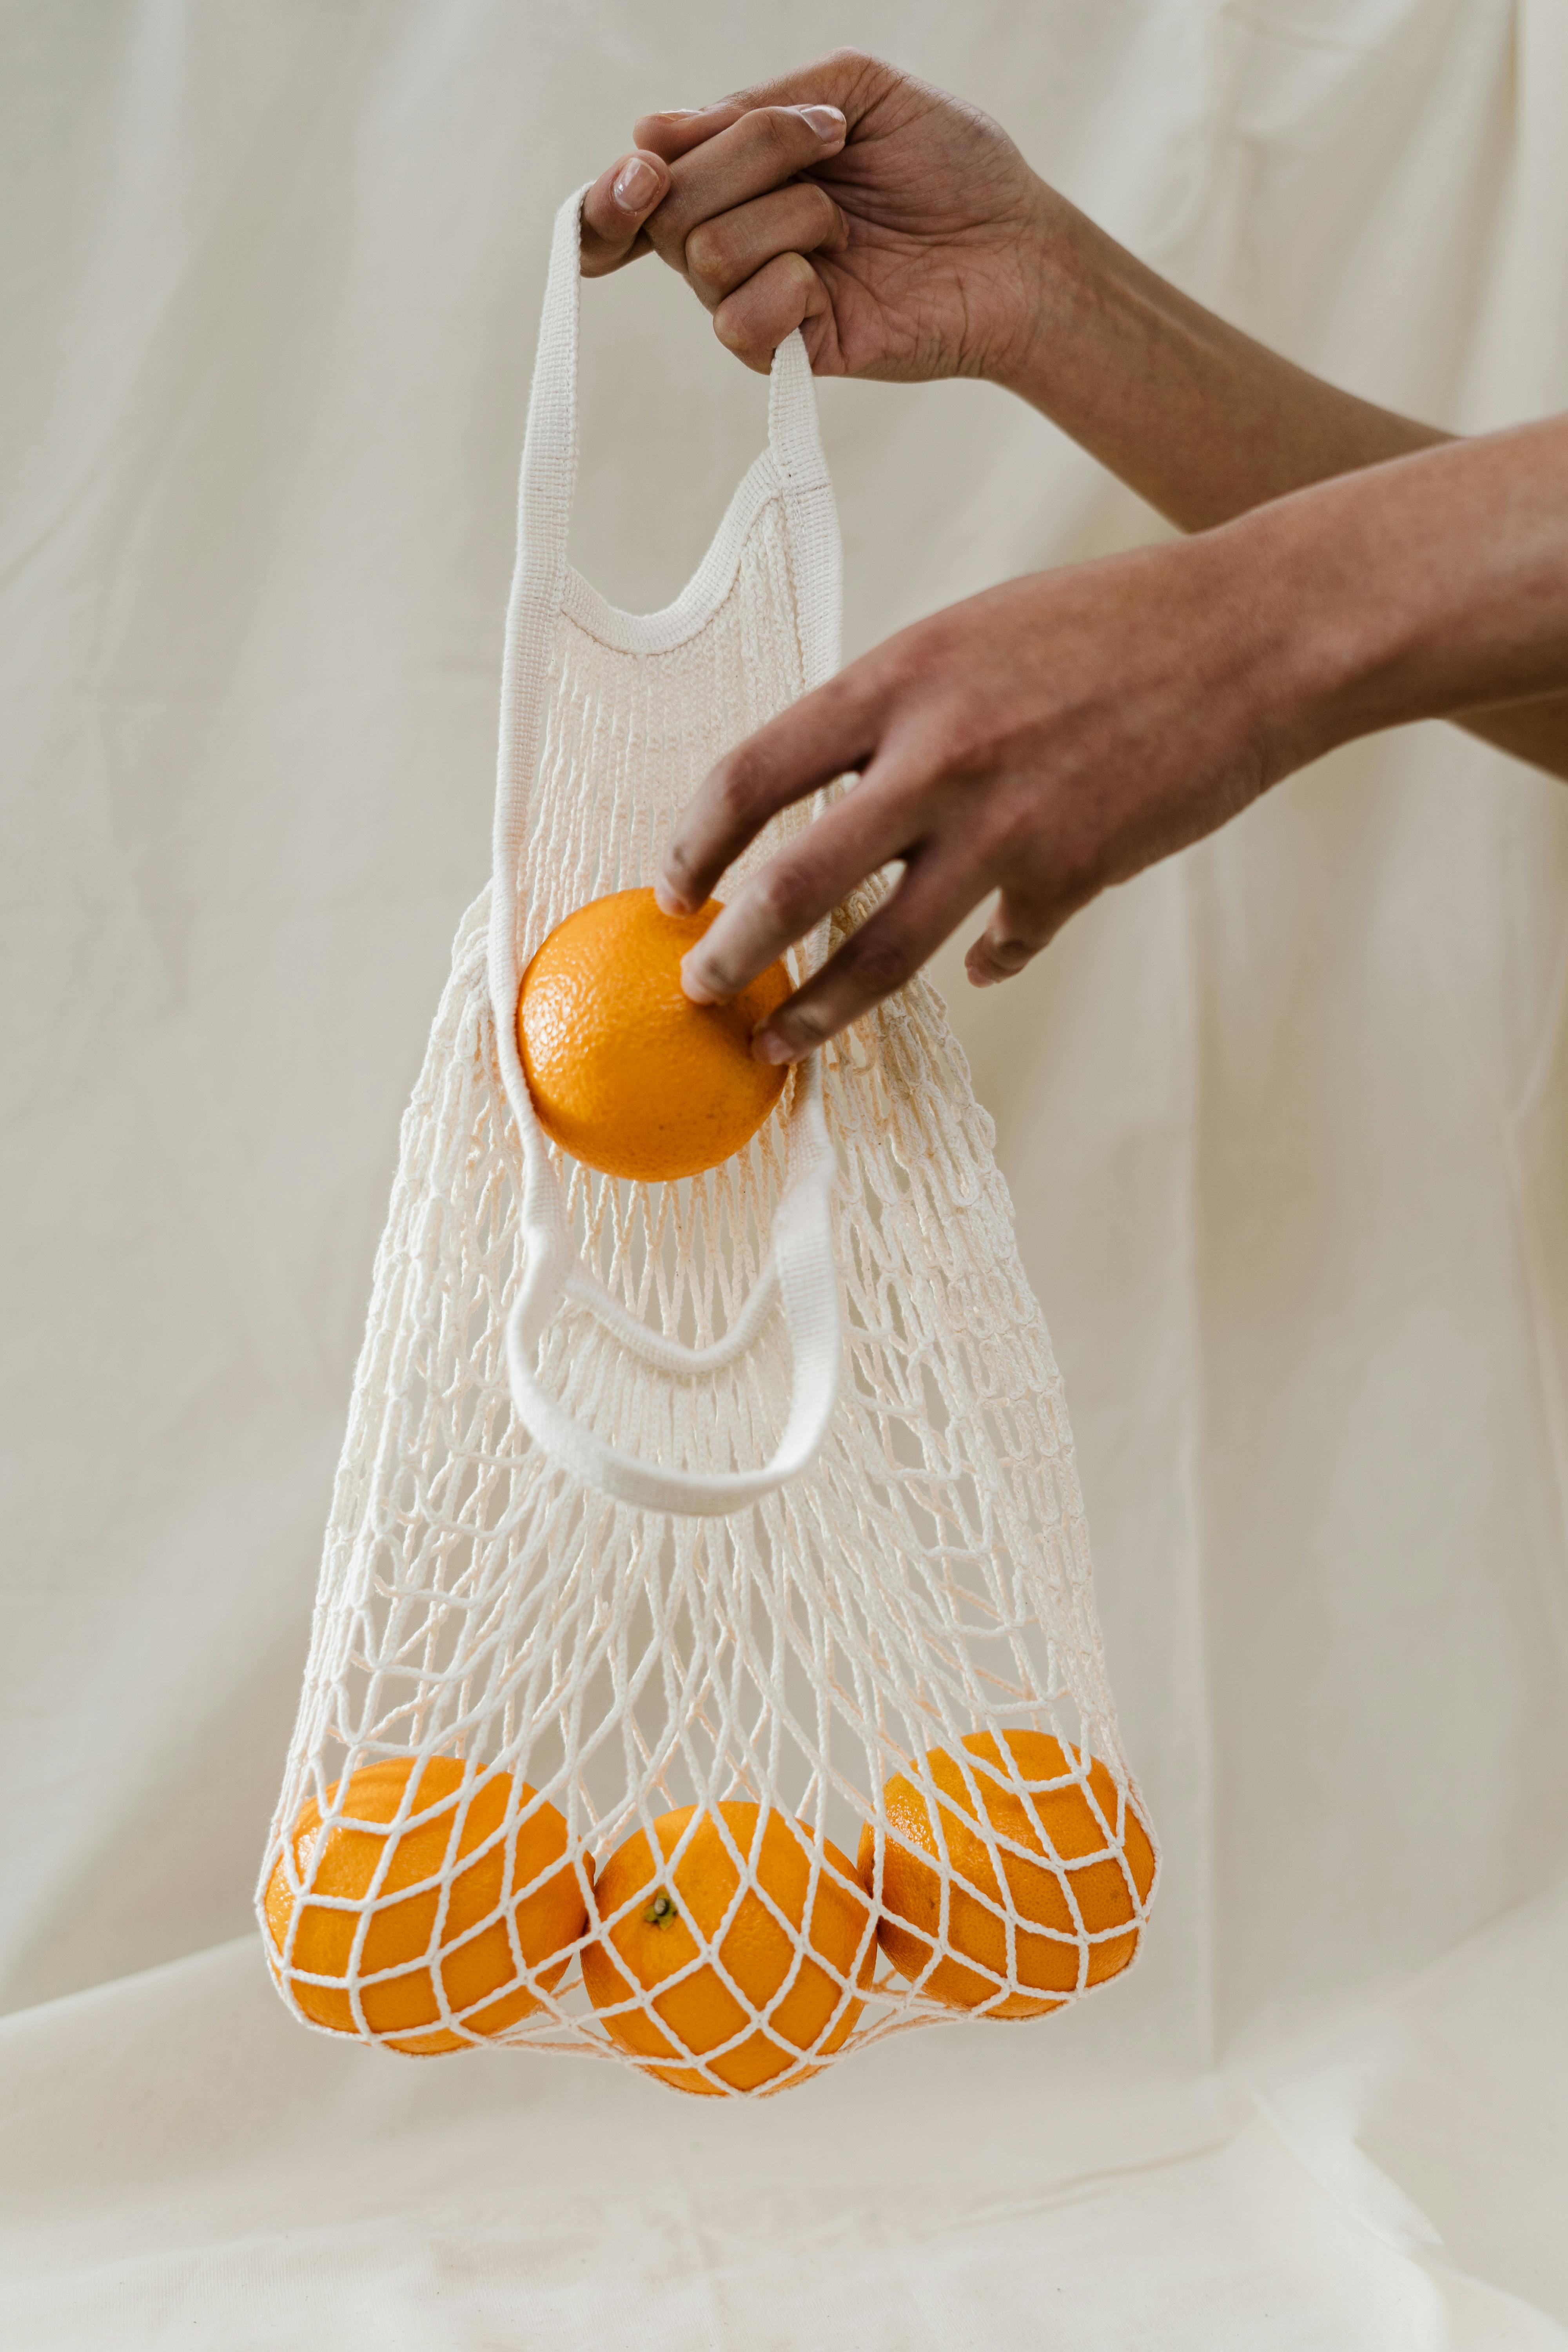 191 Group Oranges Net Bag Stock Photos  Free  RoyaltyFree Stock Photos  from Dreamstime